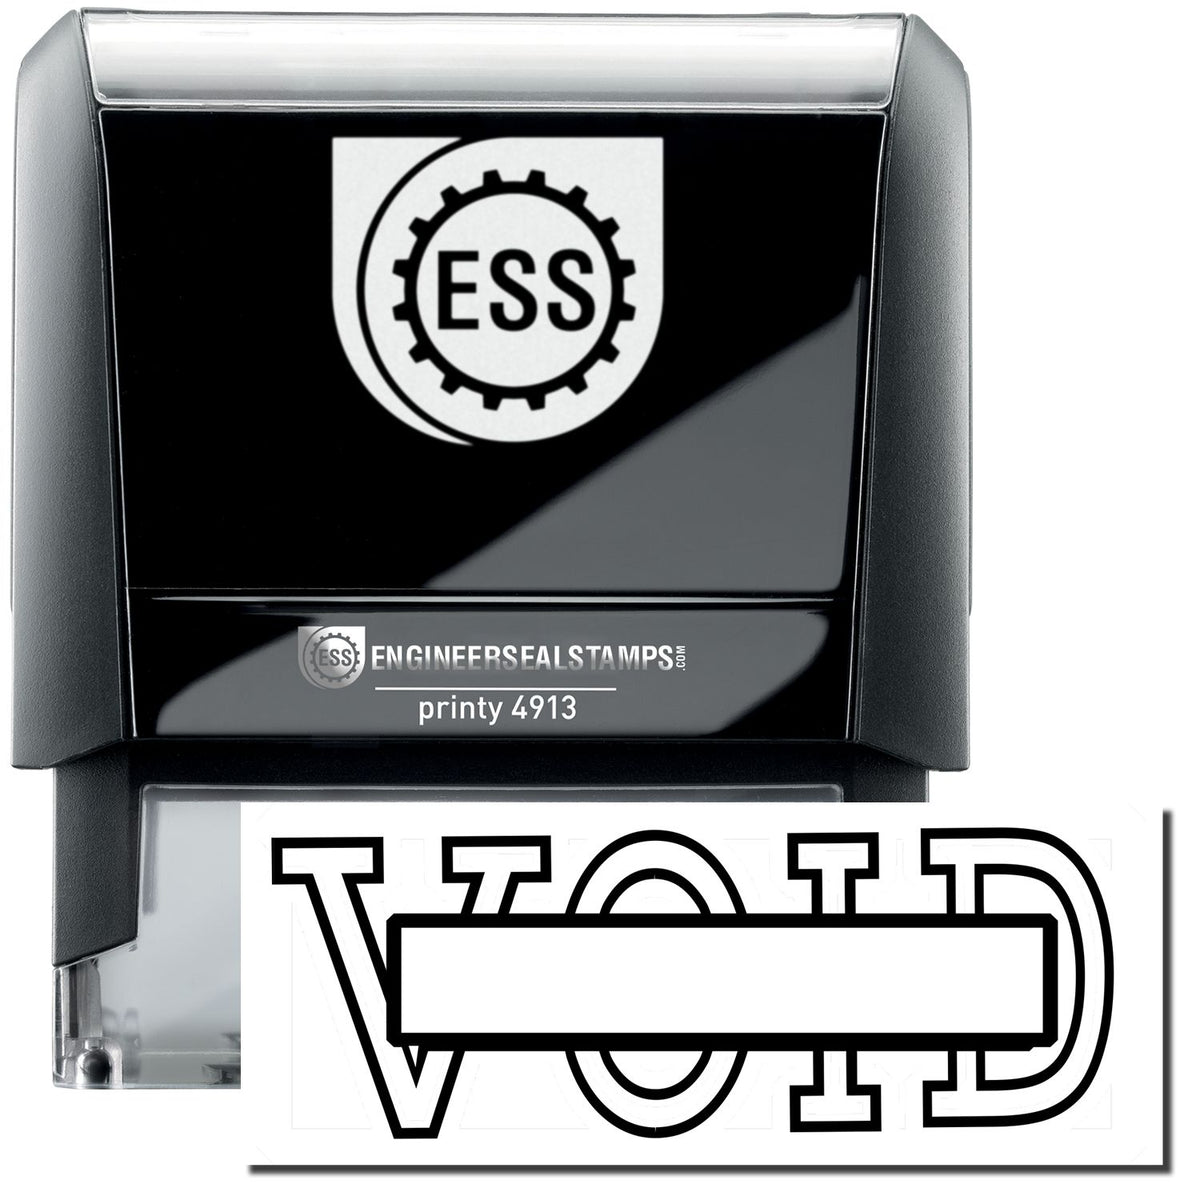 A self-inking stamp with a stamped image showing how the text &quot;VOID&quot; in a large outline style with a box on it is displayed after stamping.